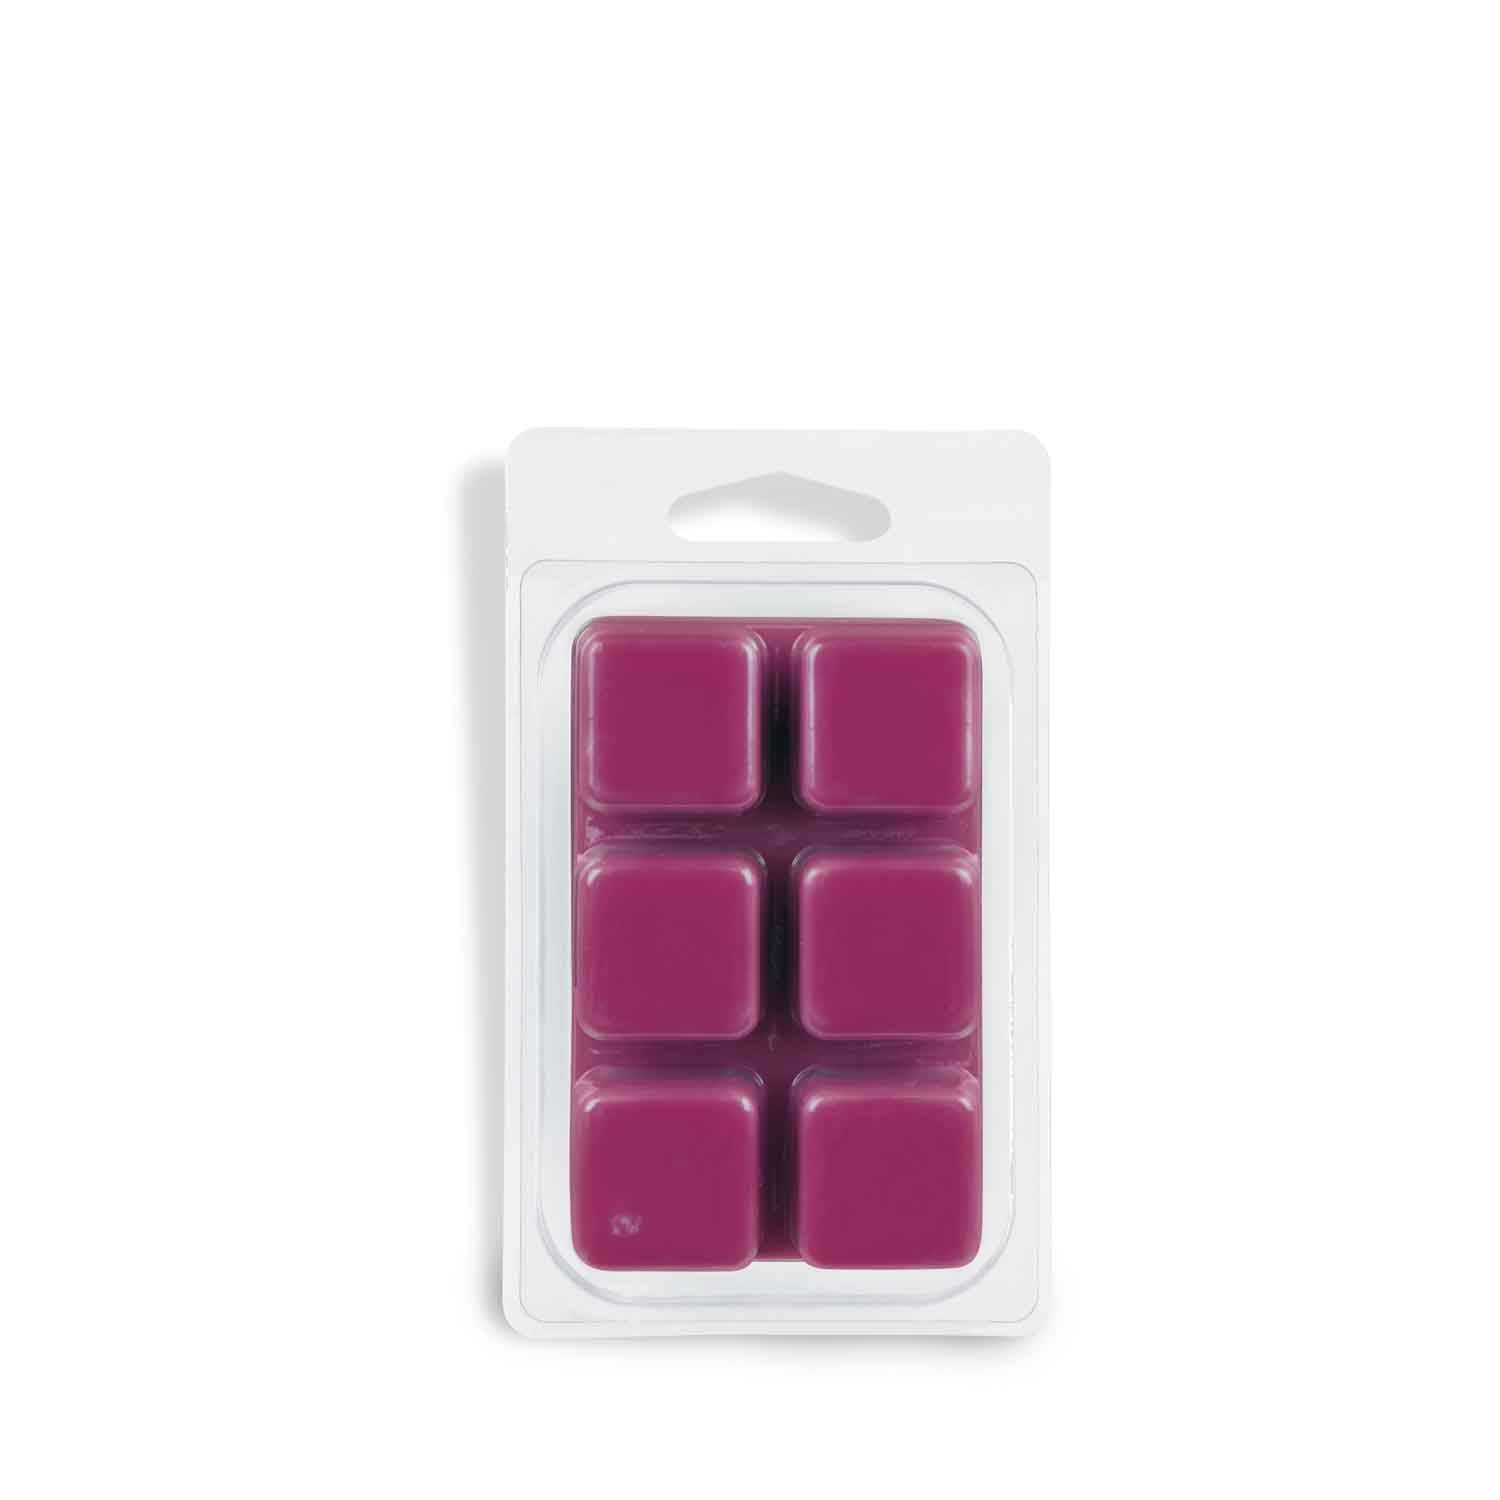 Scented Wax Melts (12 X 2.5 Oz) Natural Soy Wax Cube For Warmer Cubes/tarts